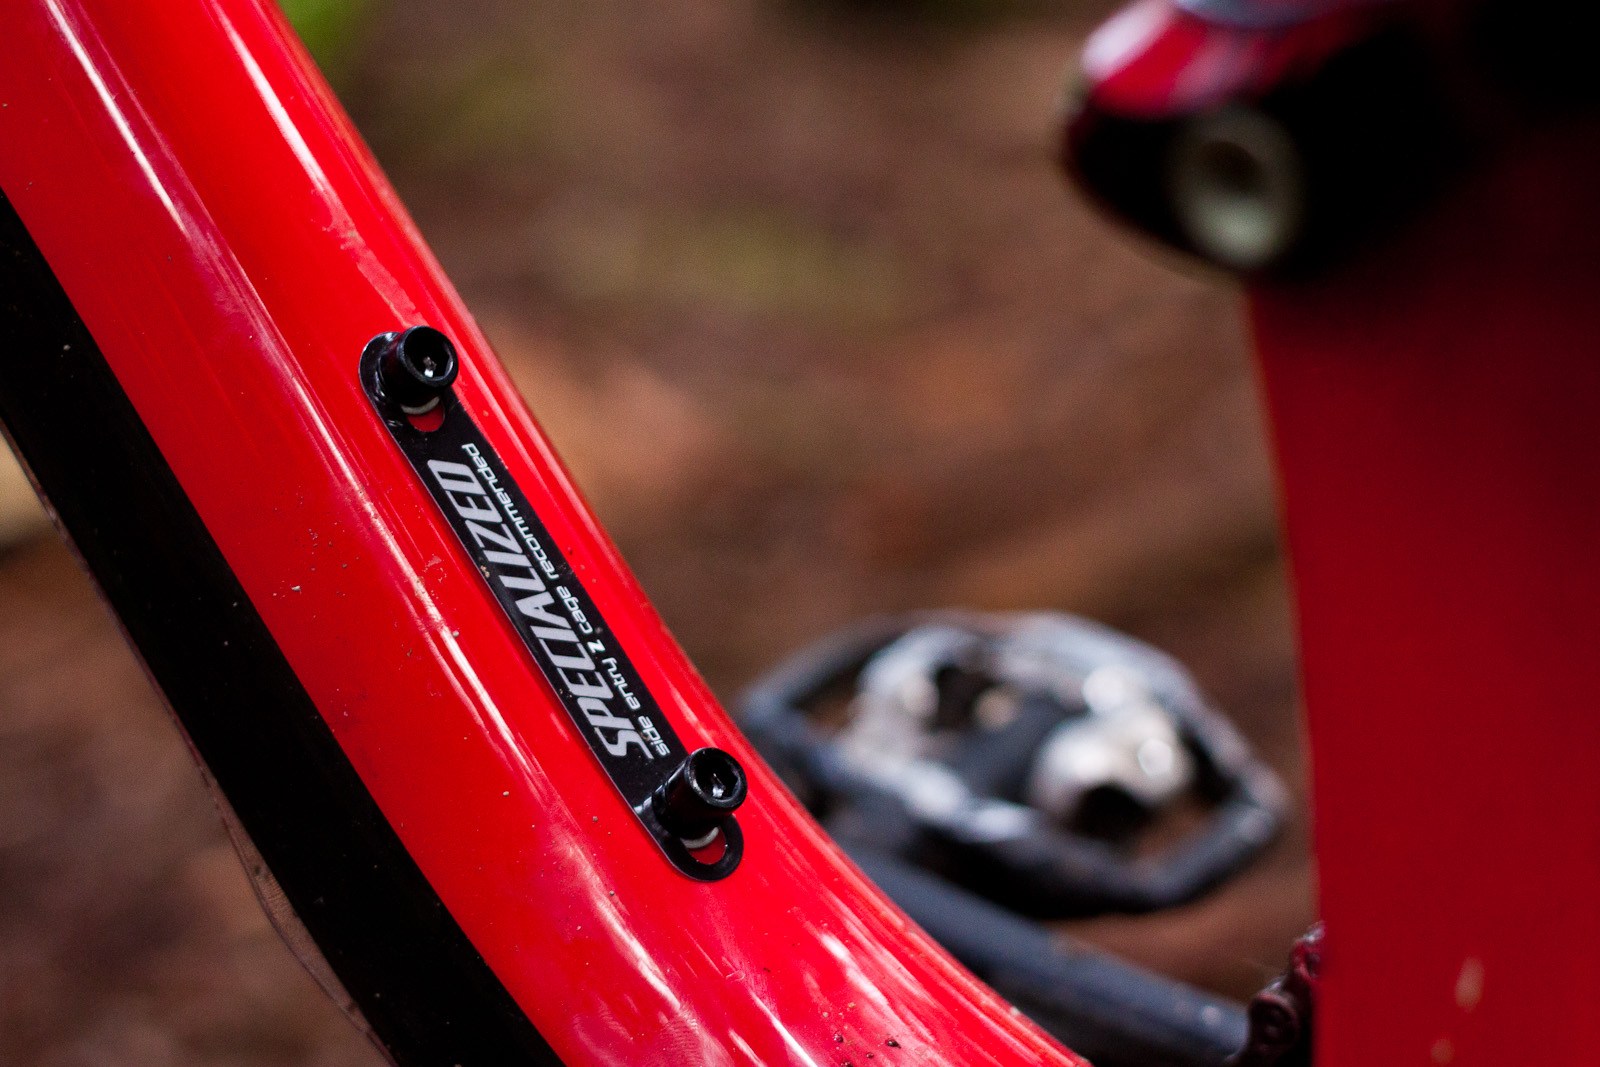 specialized camber pro 29